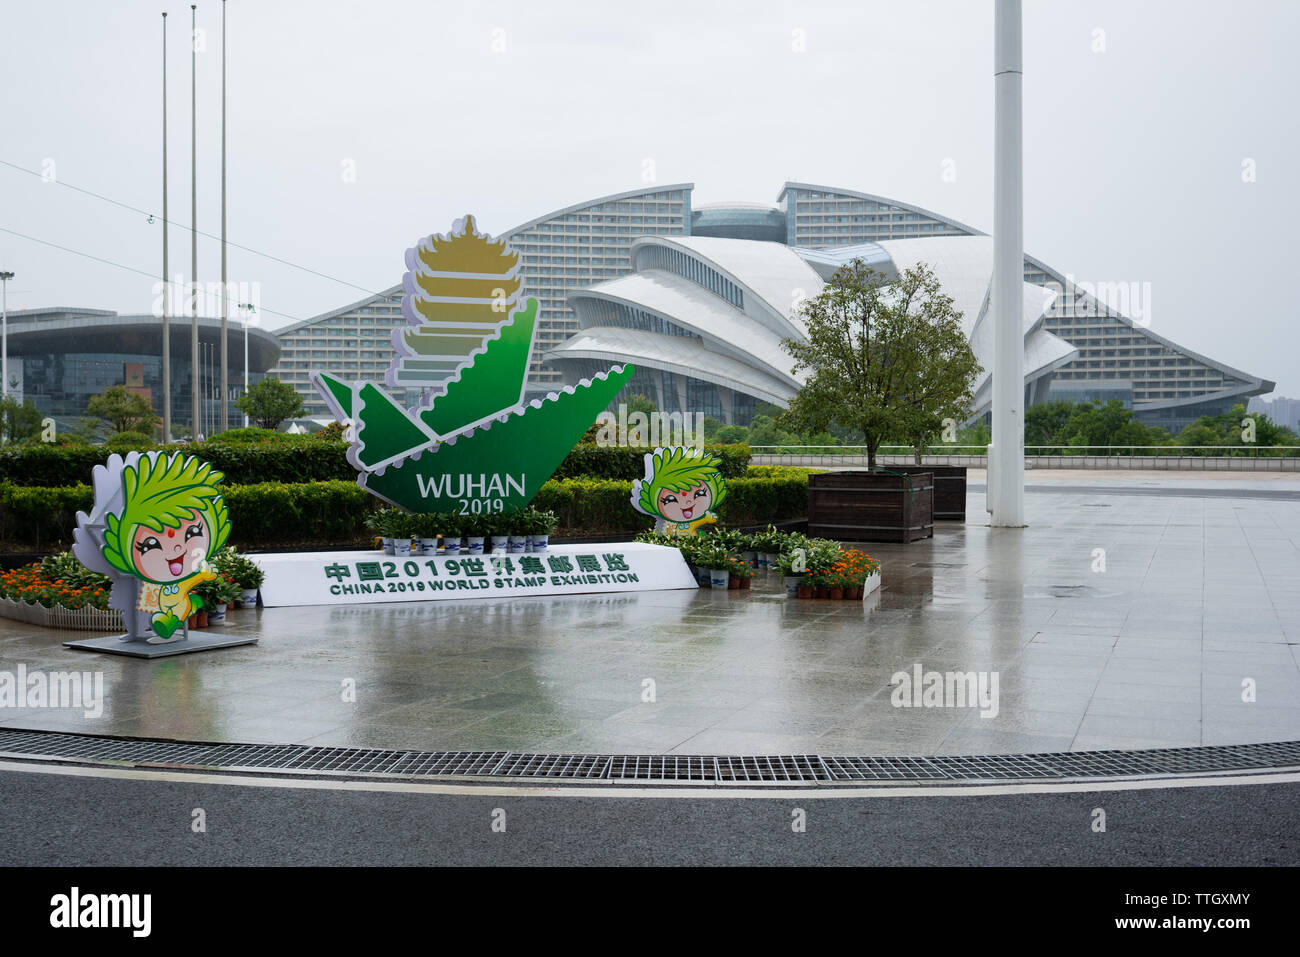 16 June 2019, Wuhan China : Exterior view of the Wuhan International Expo Center and sign for the China 2019 World stamp exhibition Stock Photo